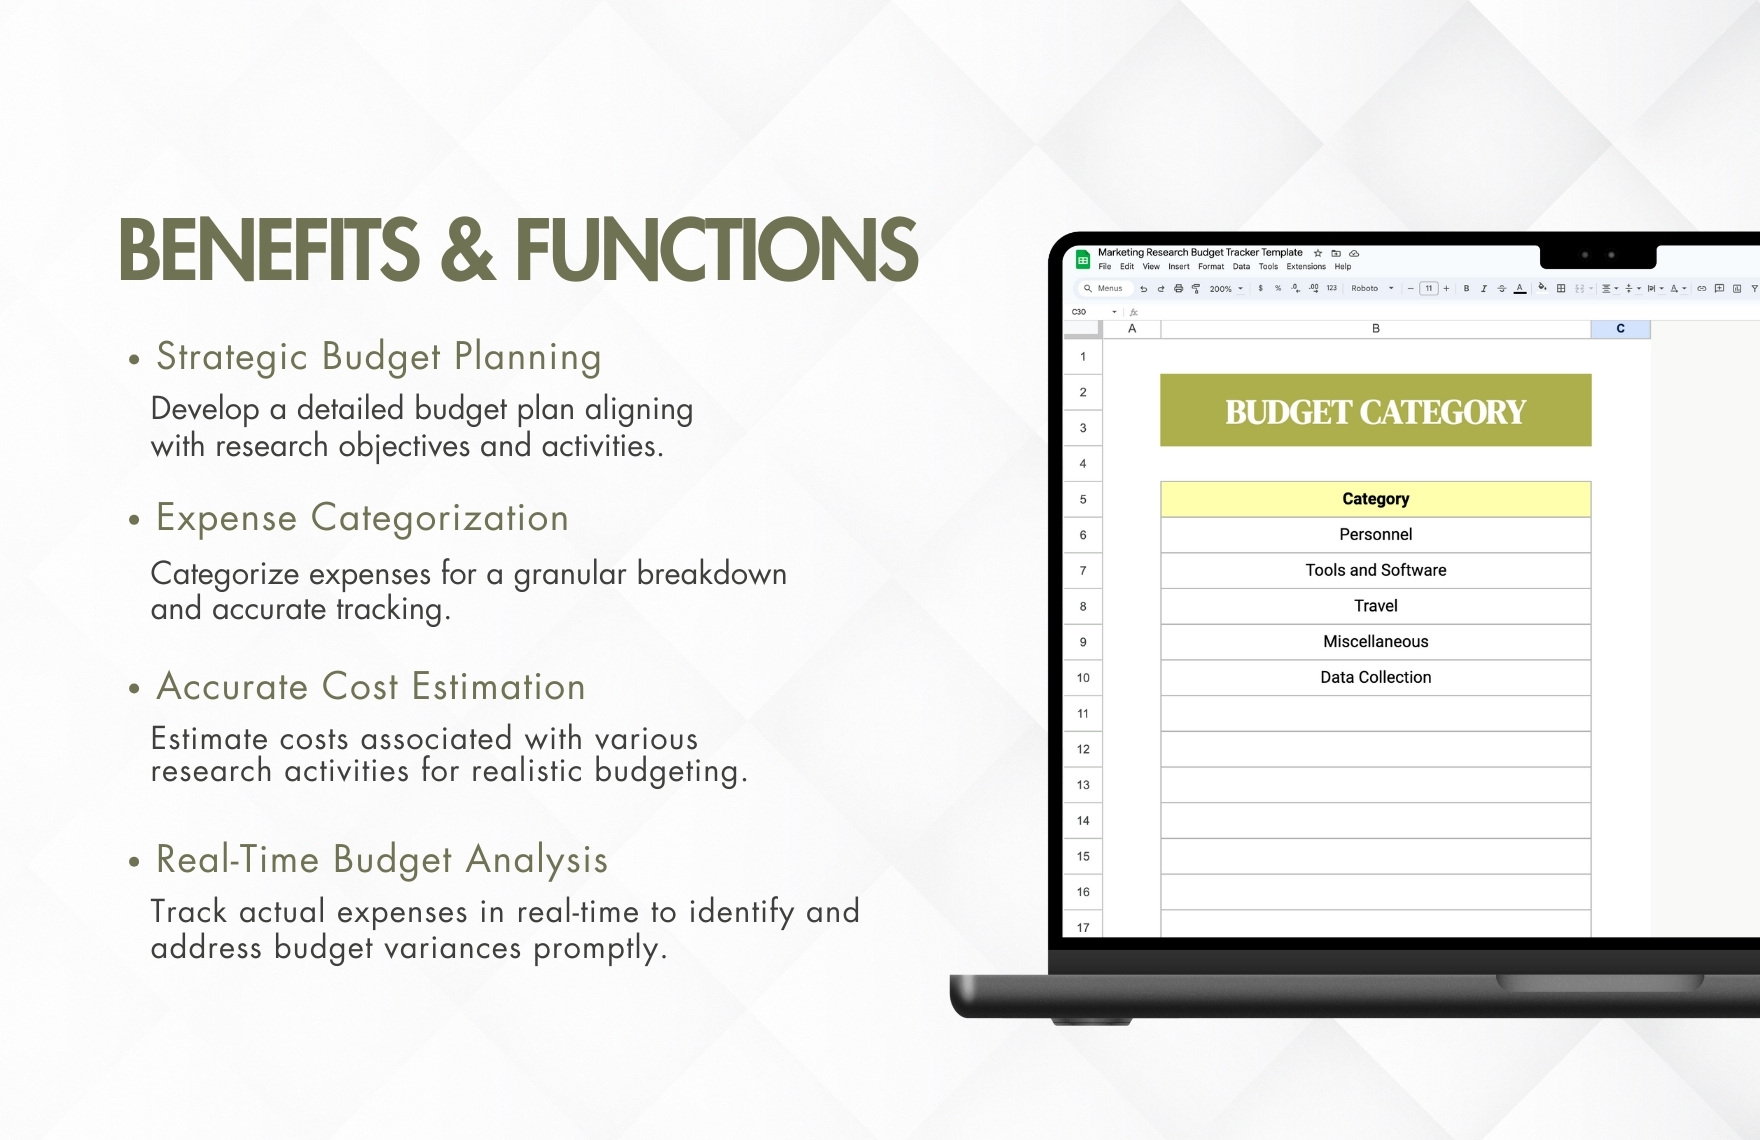 Marketing Research Budget Tracker Template